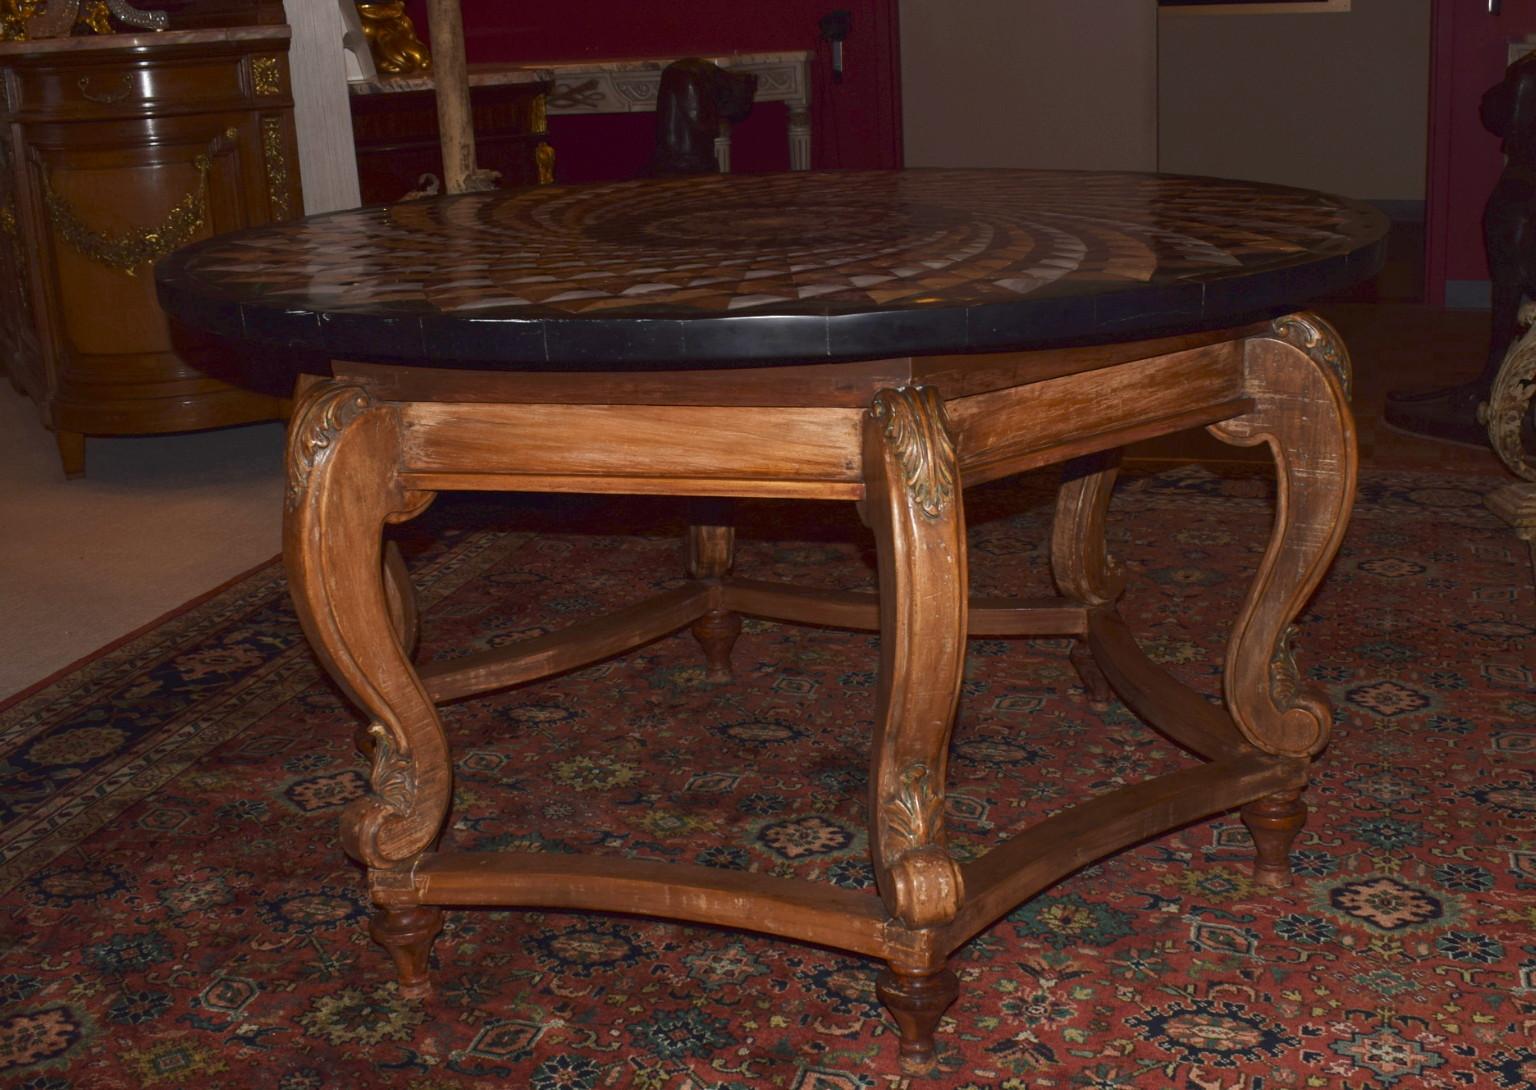 Unusual center table with amazing inlaid marble top on a fine hand-carved wood base.